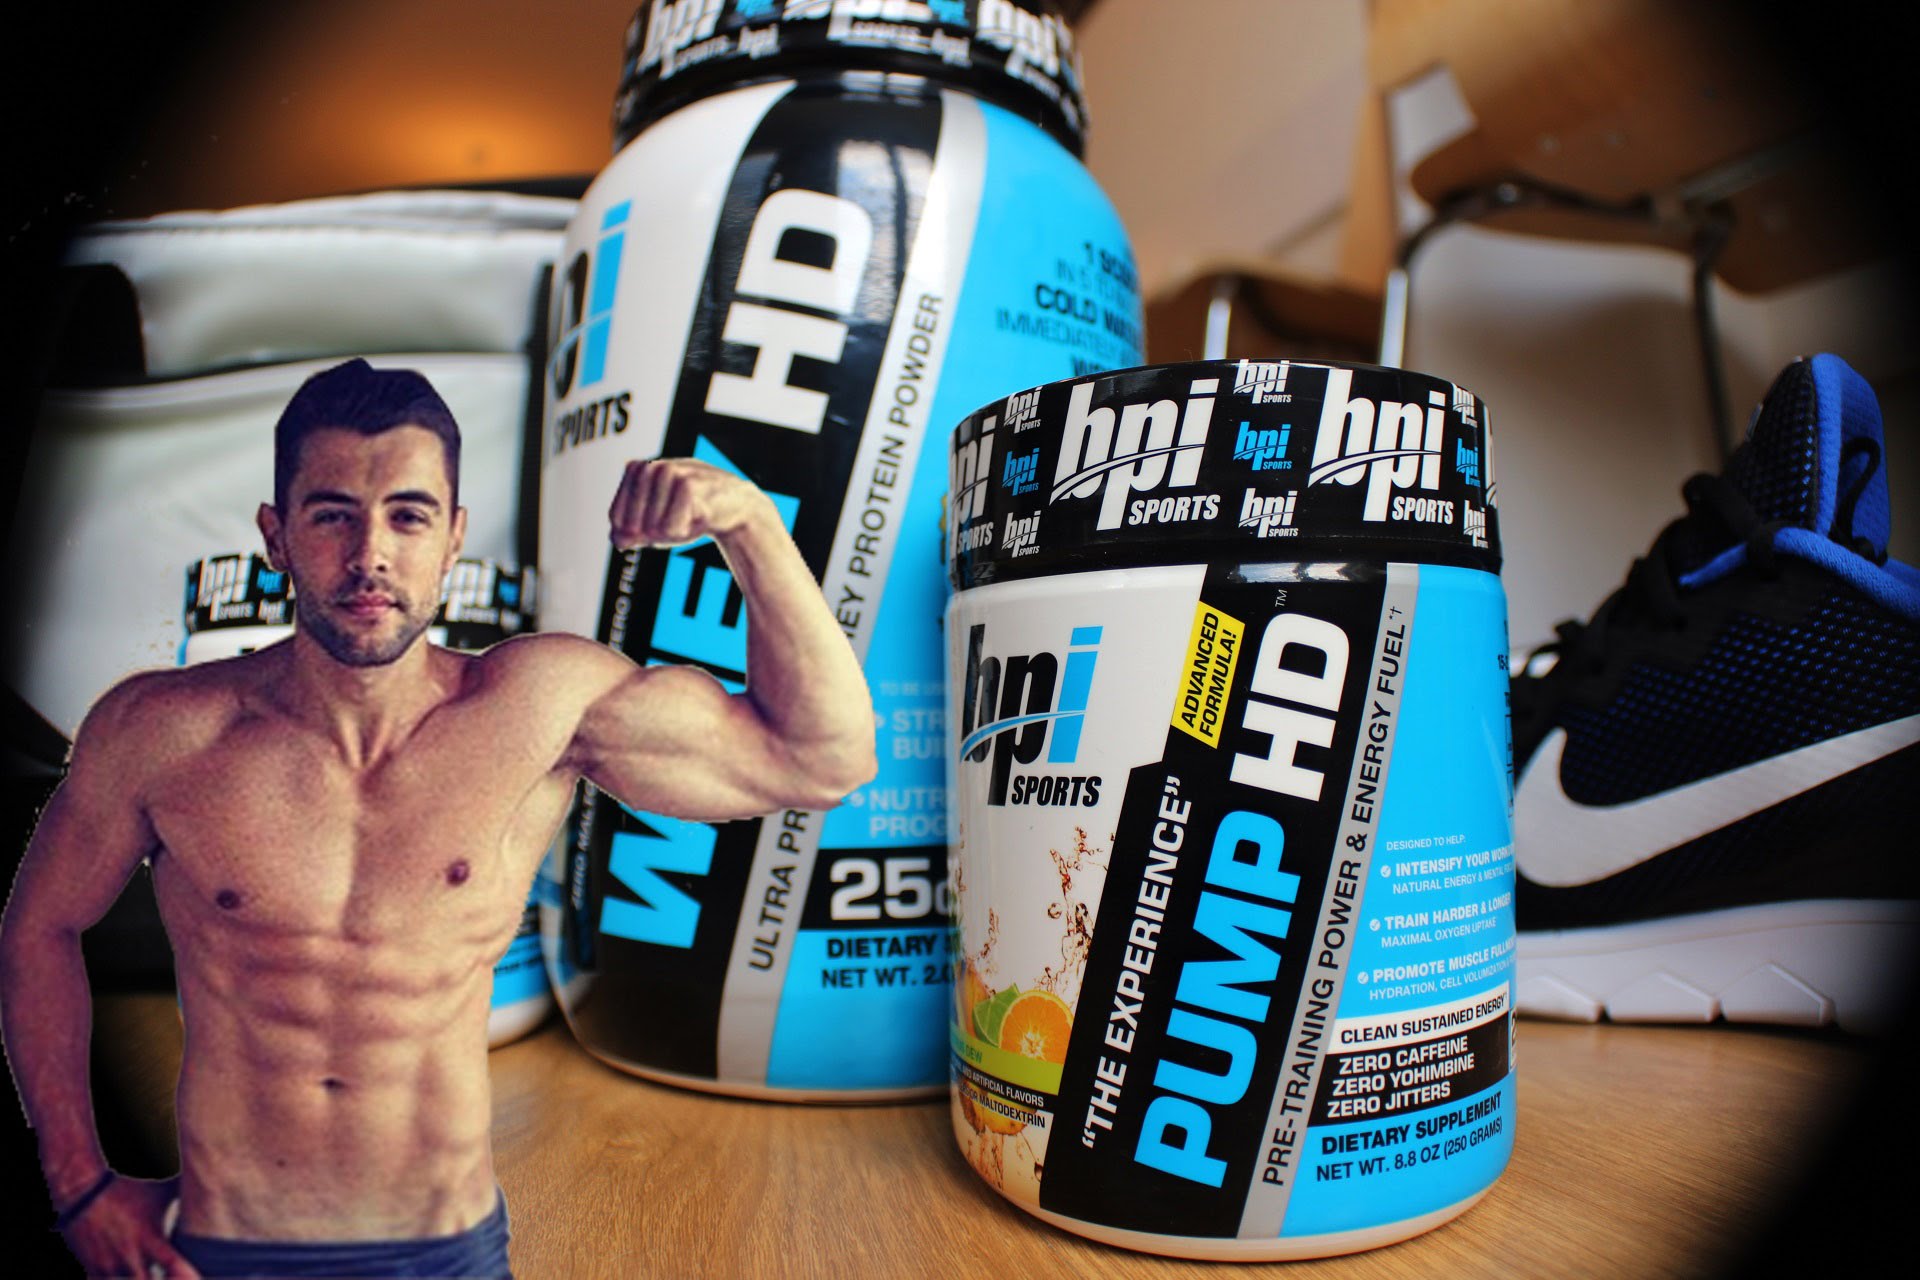 30 Days Extreme Cut Challenge Supplements Review – BPI Sports